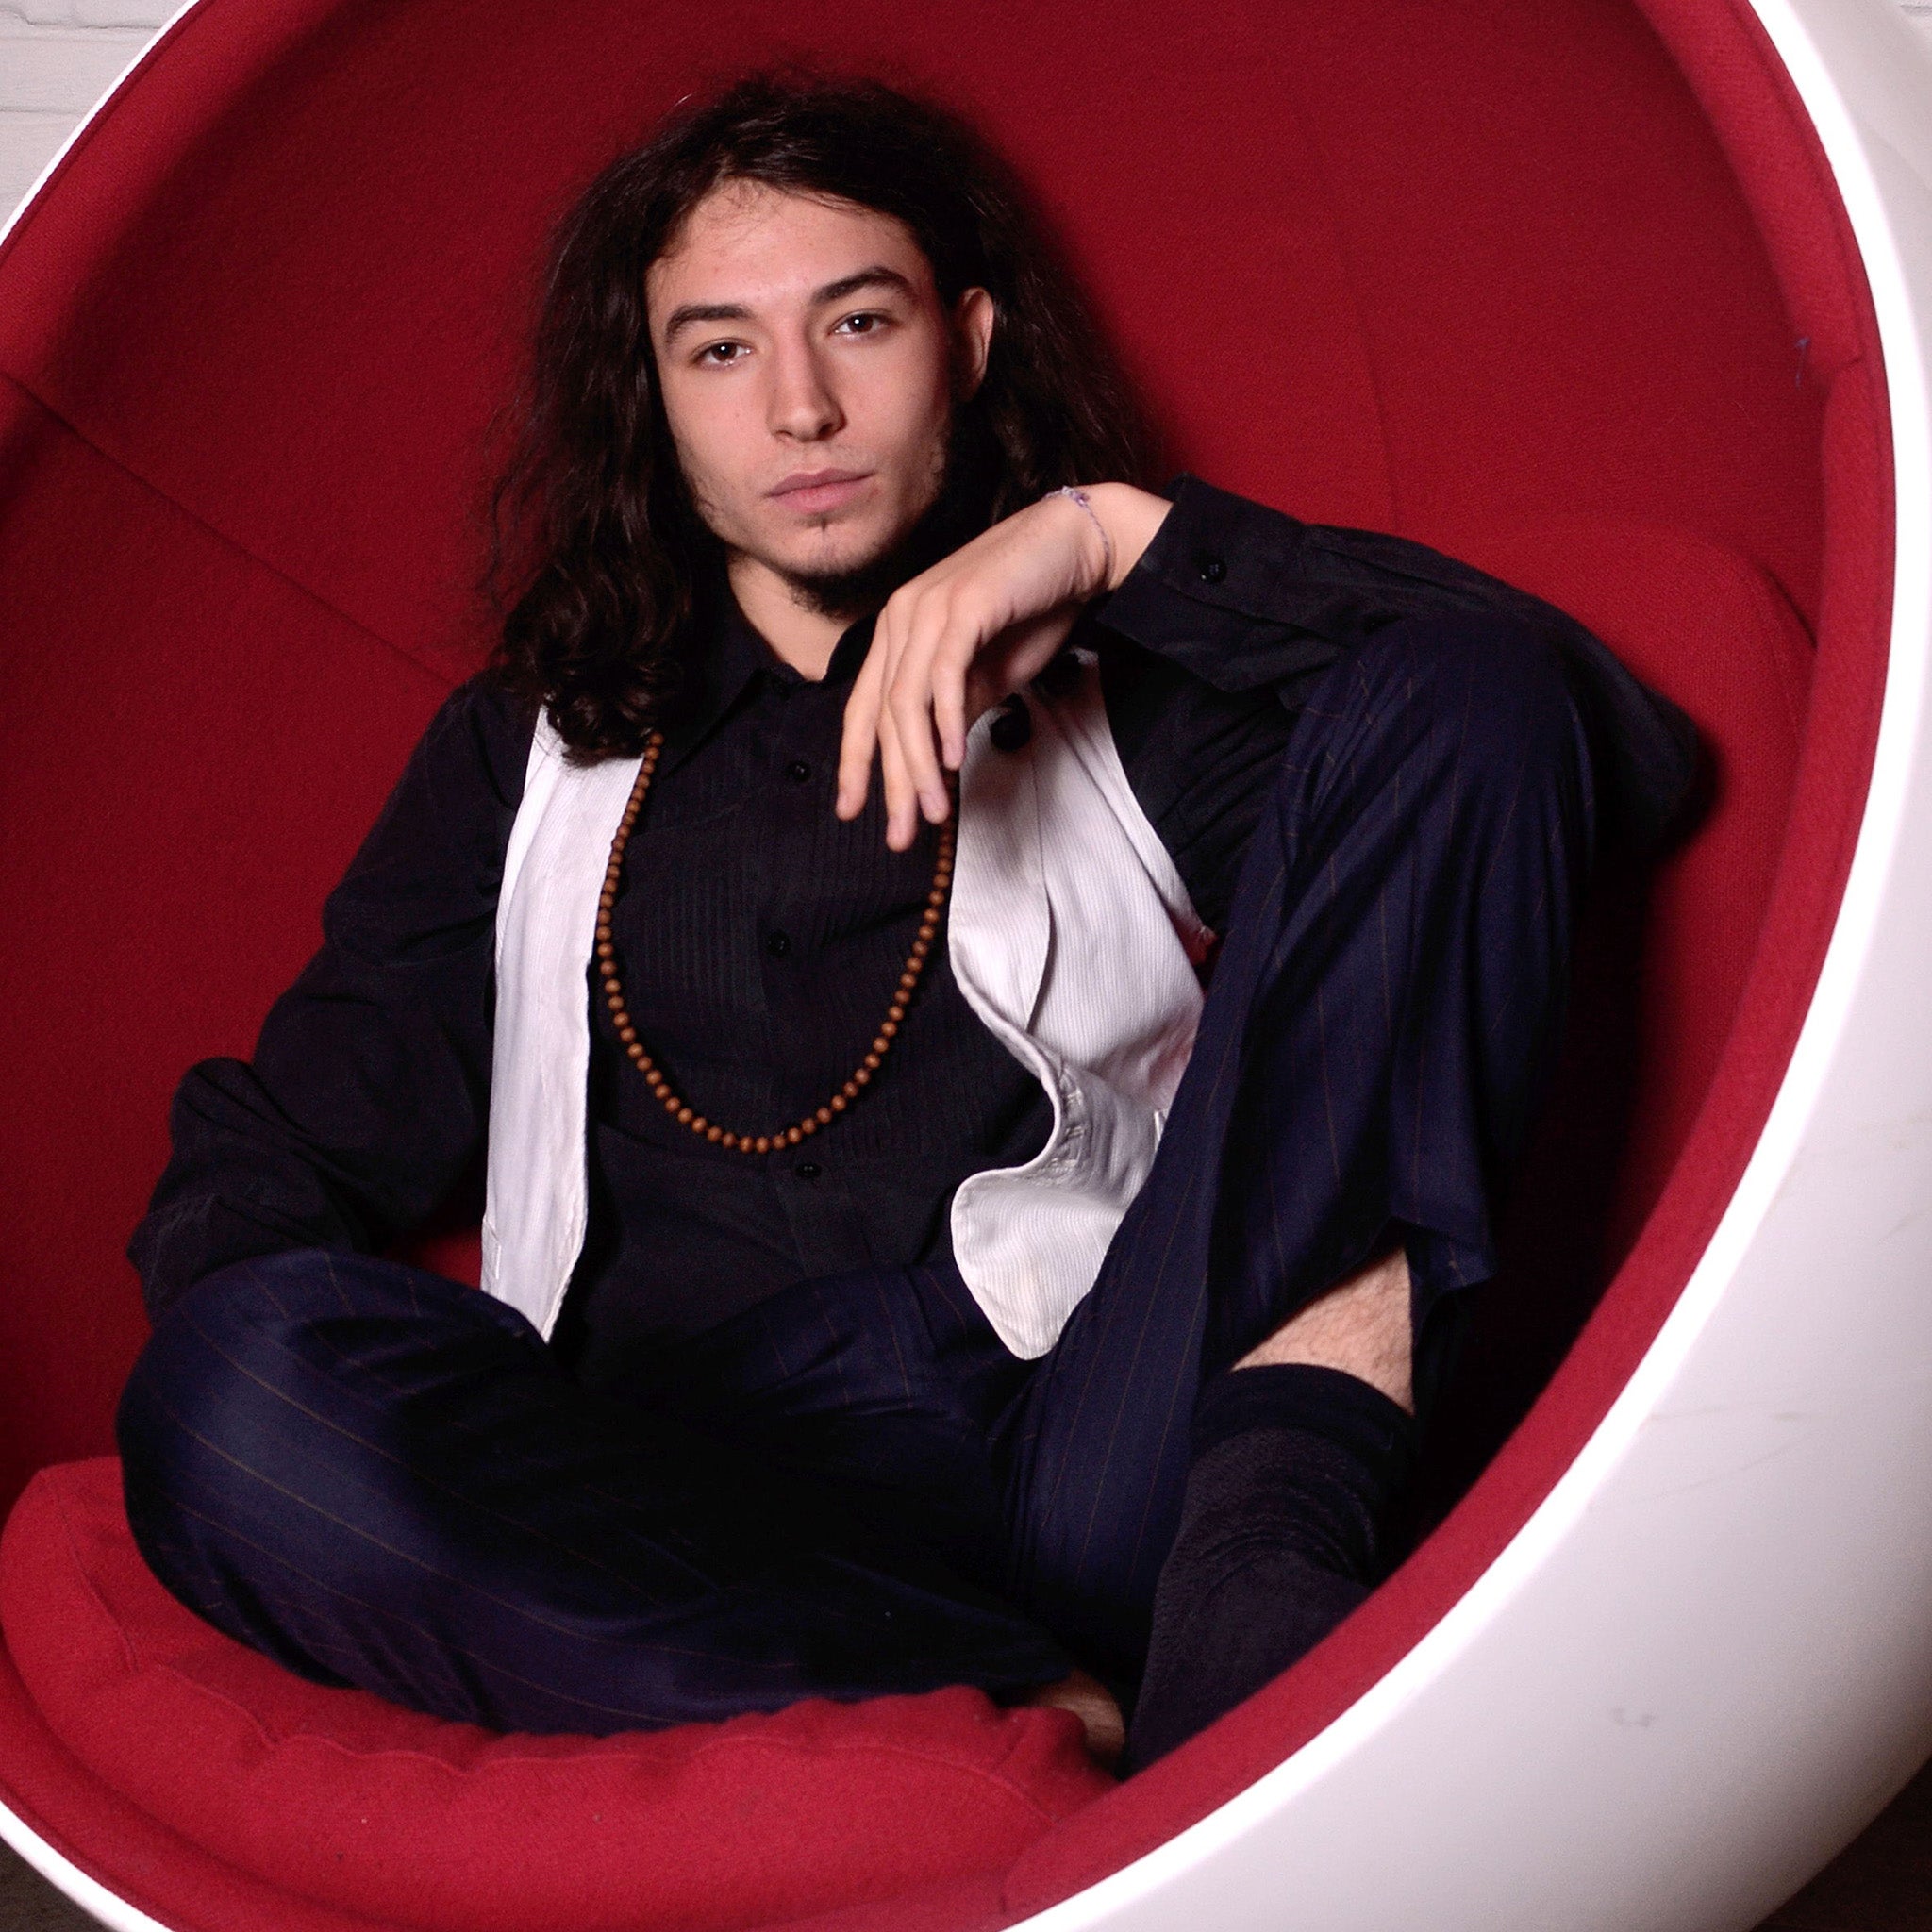 Ezra Miller will play DC Comics’ The Flash in a Warner Bros-produced solo outing in 2018